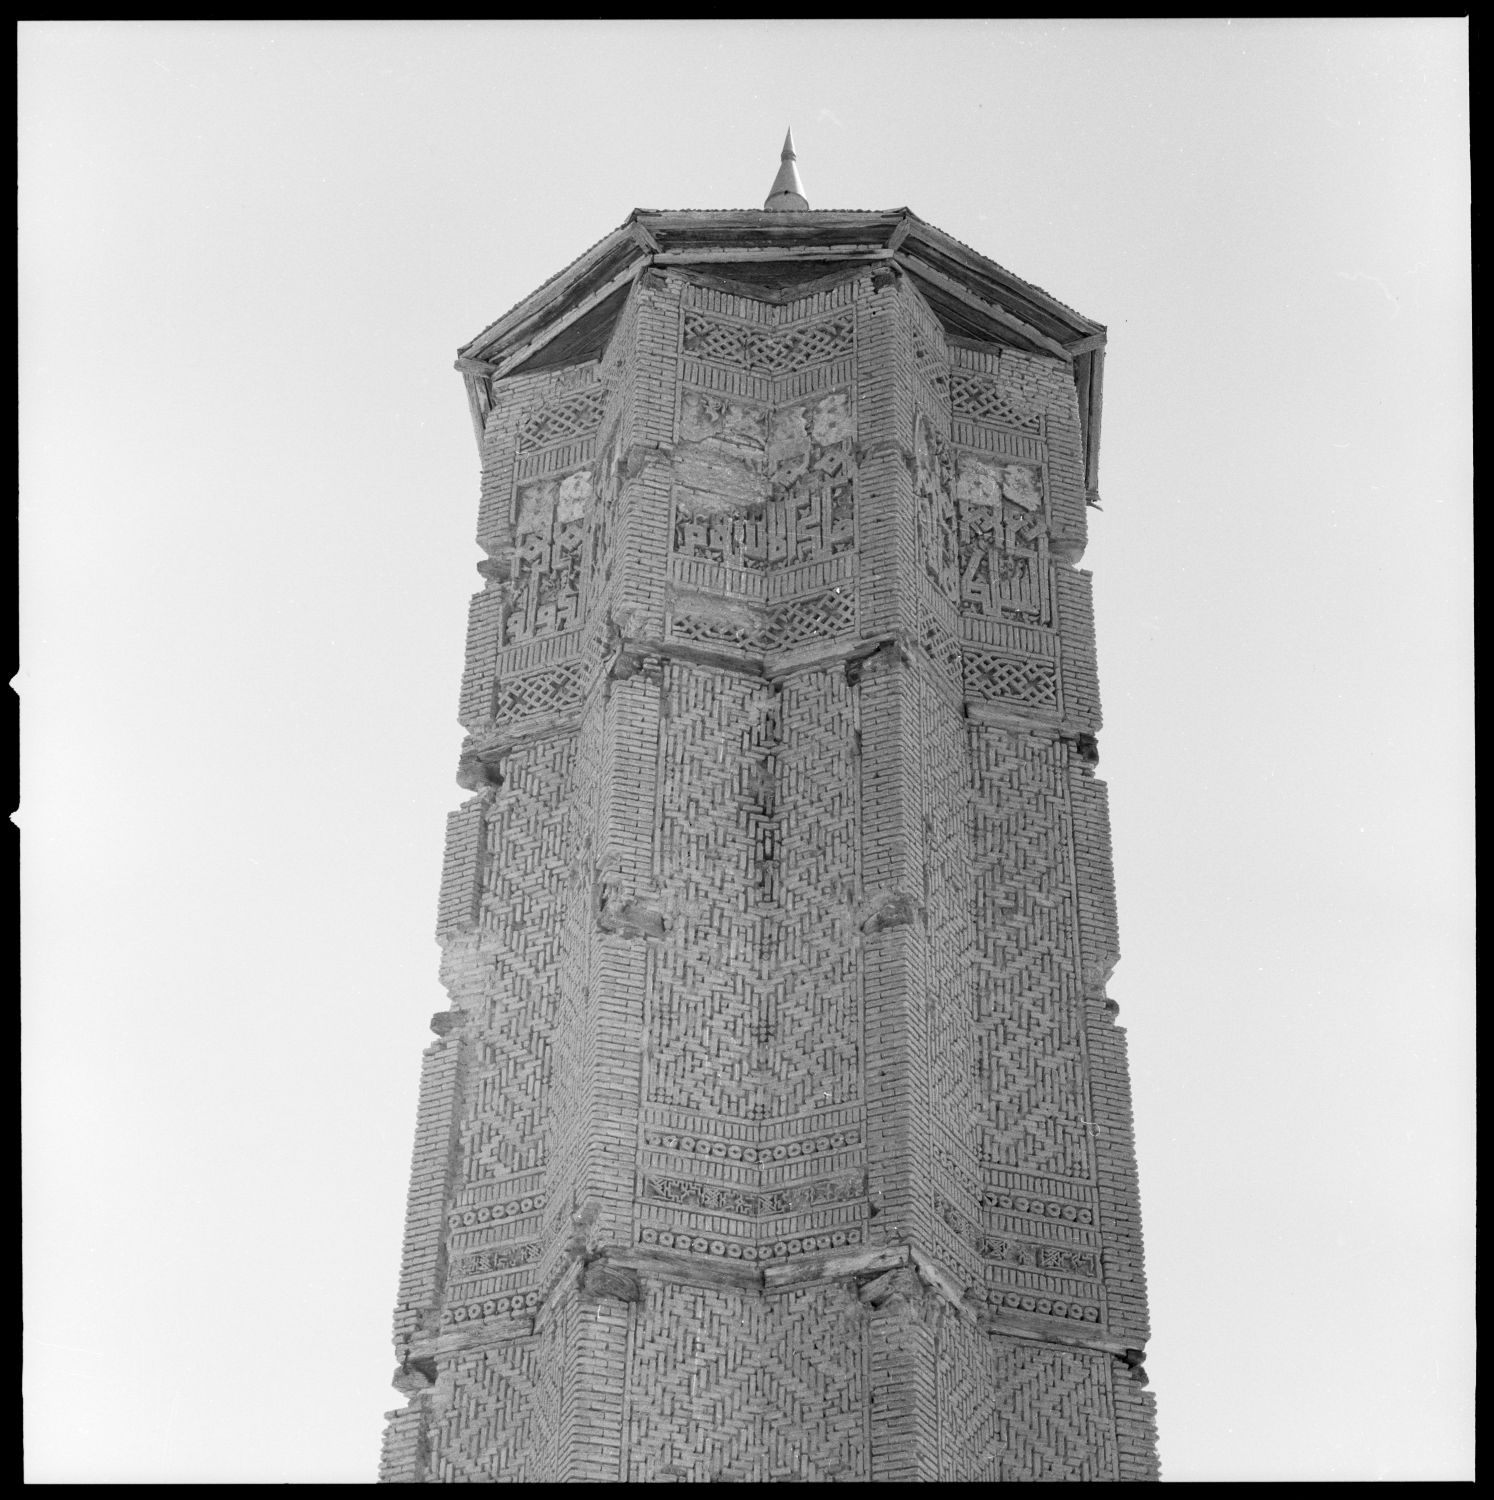 Detail view of the upper half with inscription showing the name of Bahram Shah.